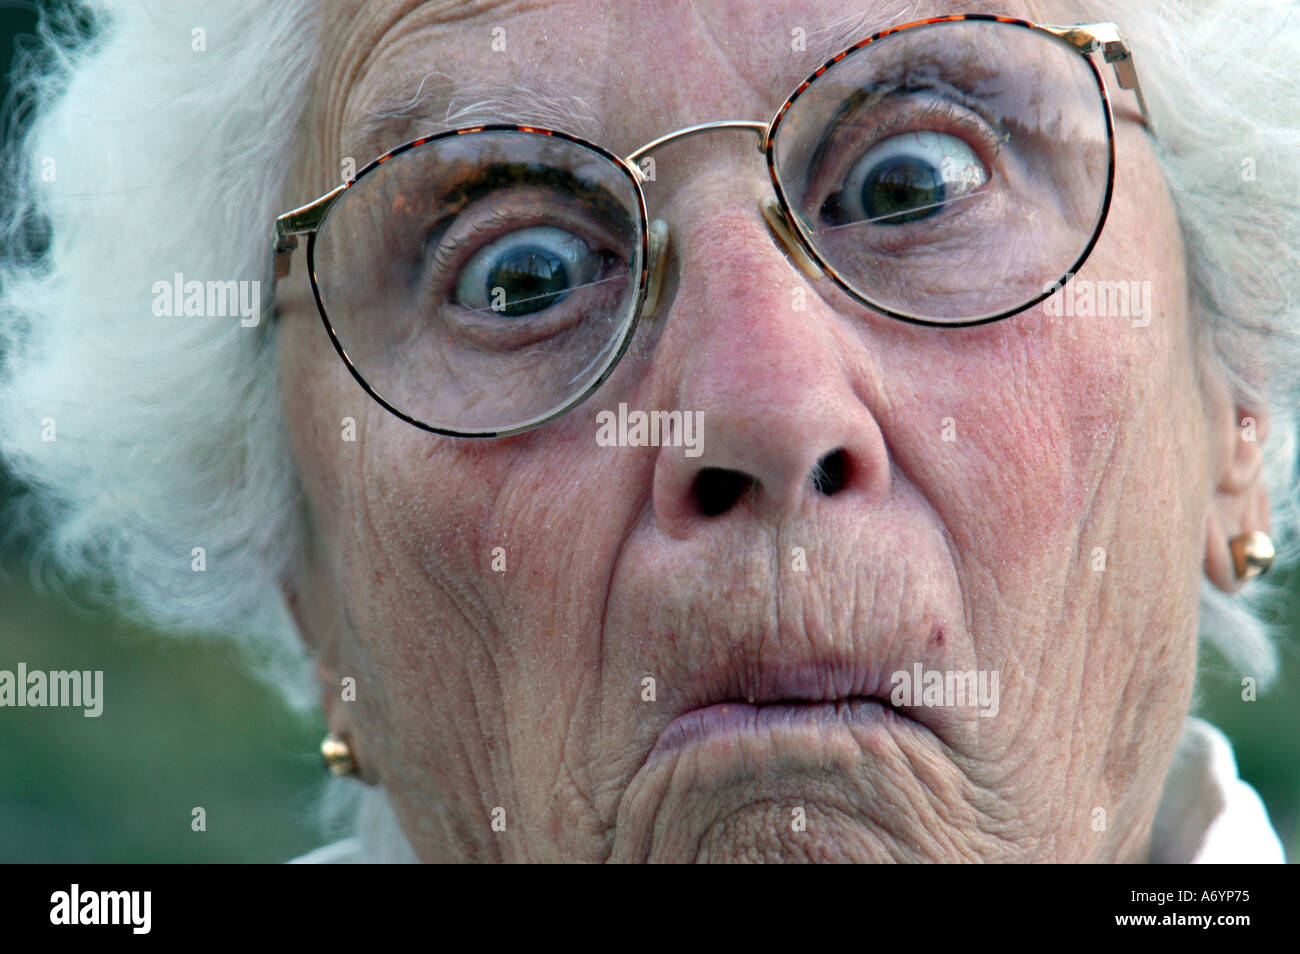 Elderly woman making funny face Stock Photo - Alamy